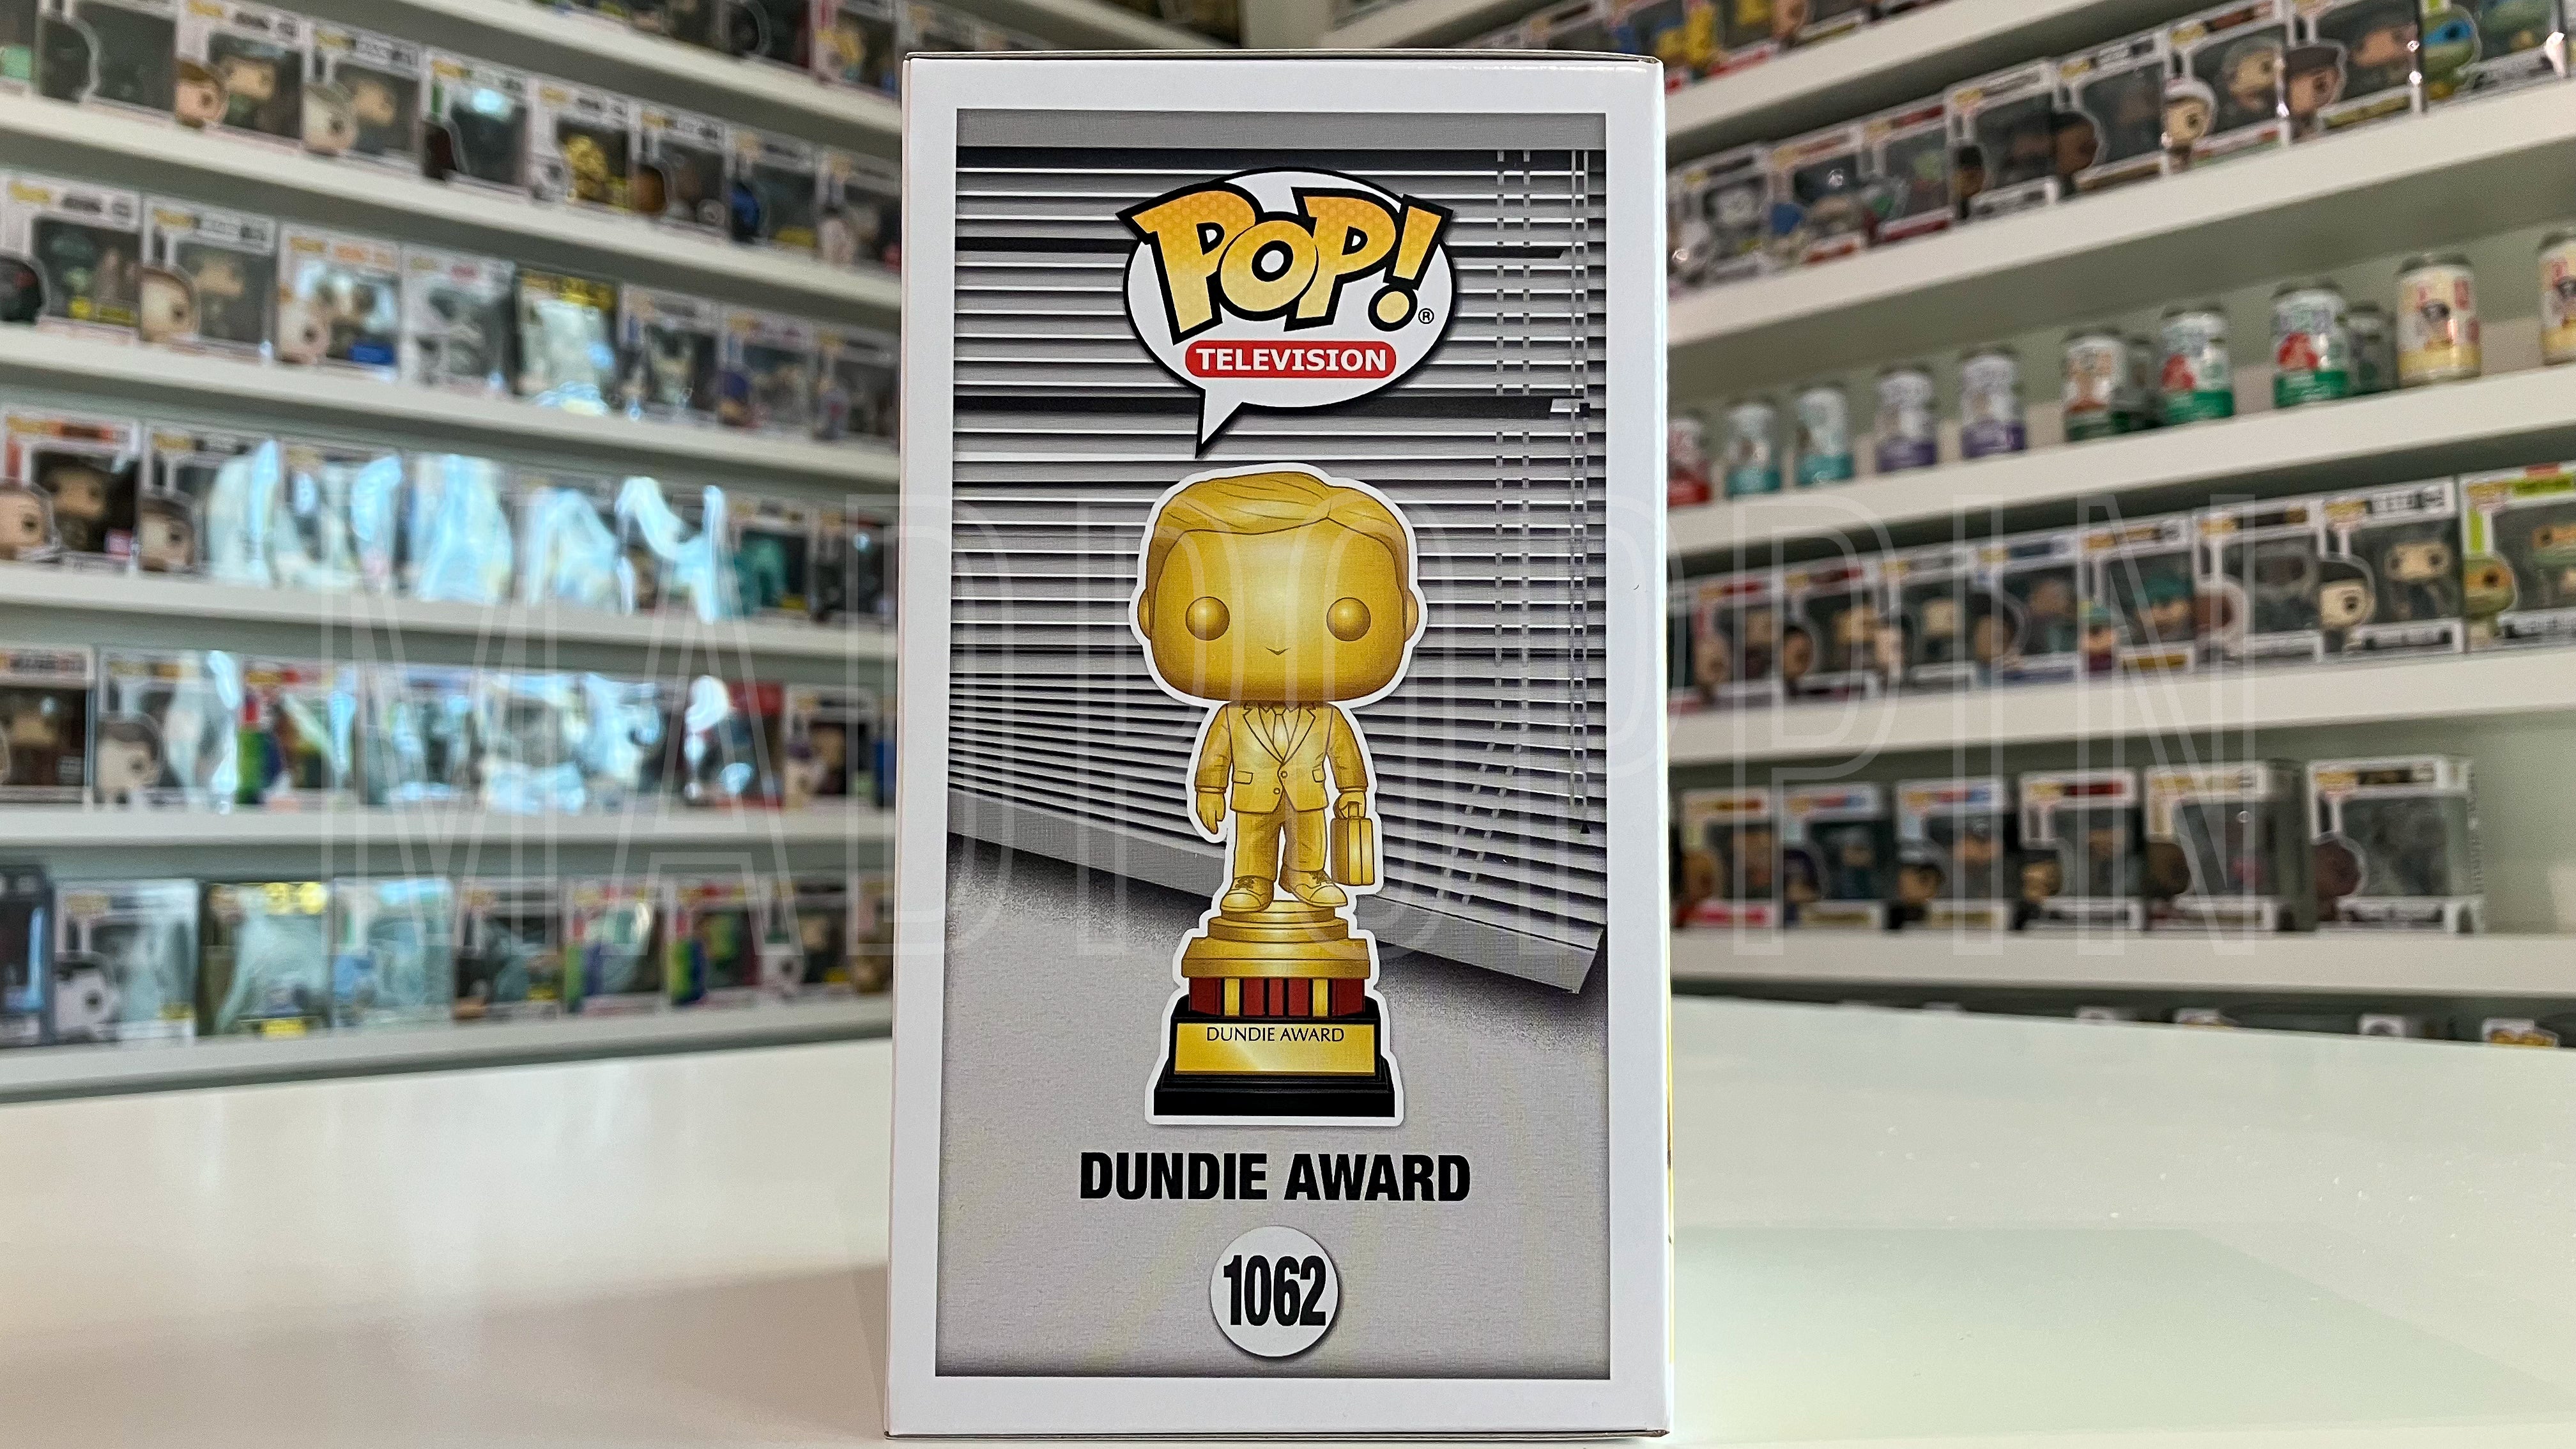 Funko Pop Tv The Office Dundie Award Gold Chrome Amazon Exclusive 1062